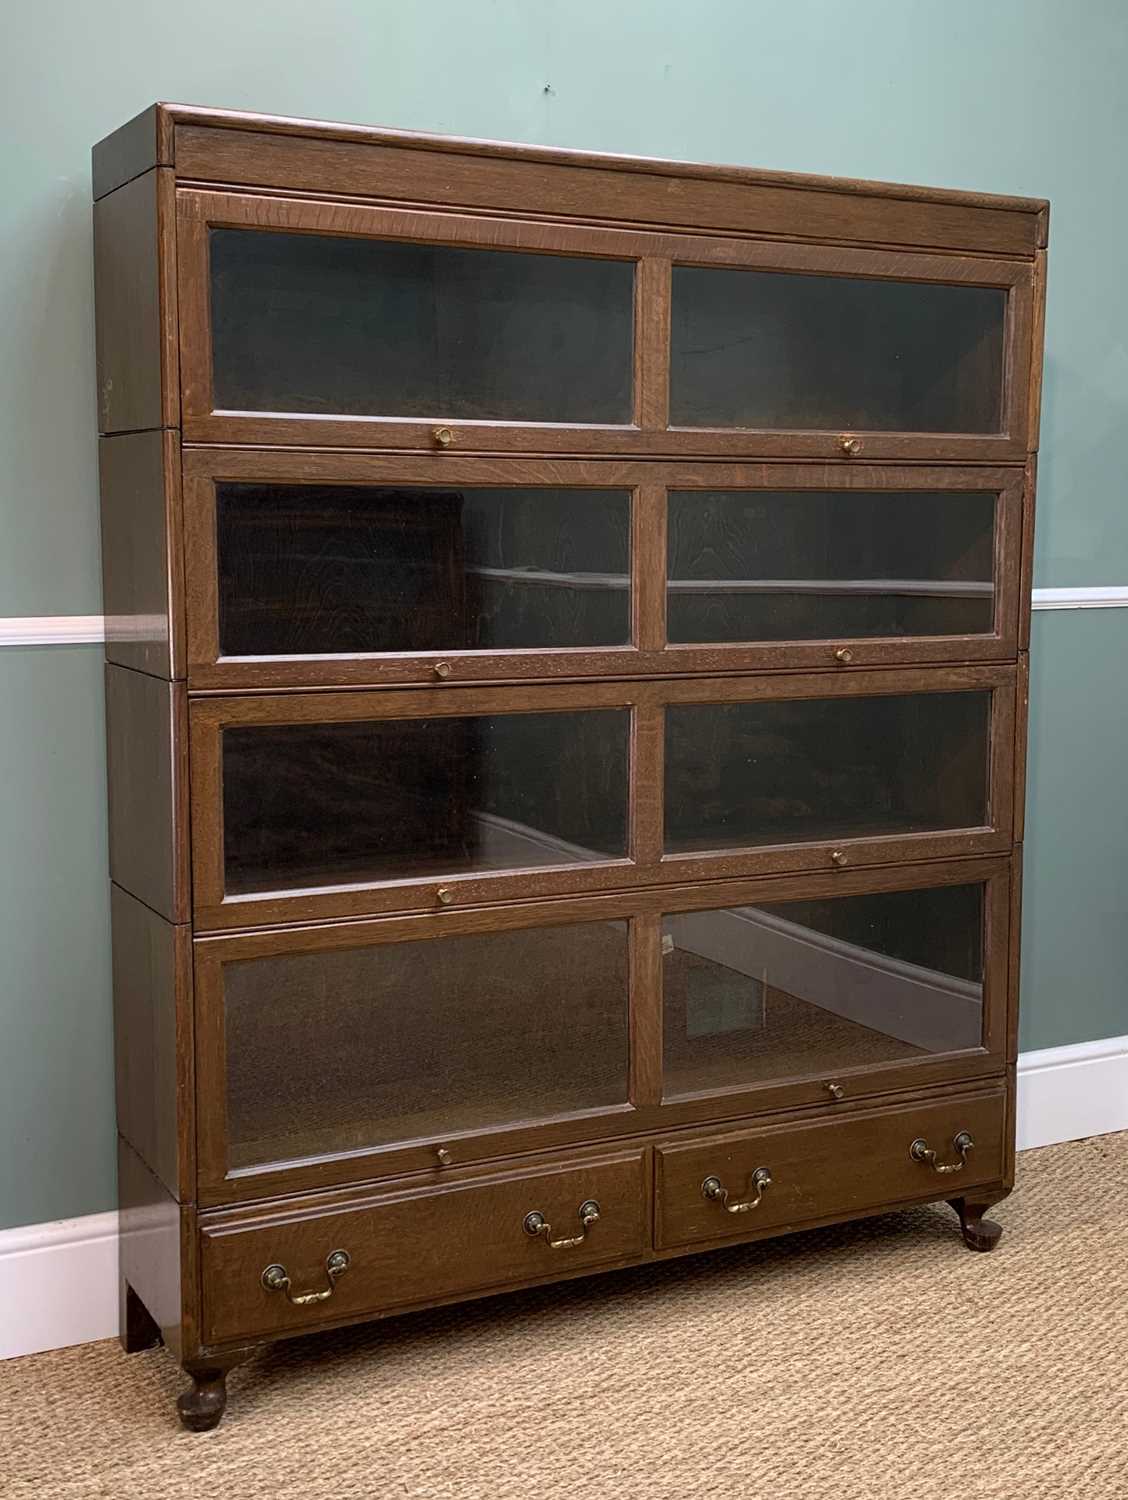 EARLY 20TH C. STAINED OAK WERNICKE STYLE BOOKCASE, four shelves with up-and-over glazed doors over - Image 2 of 2